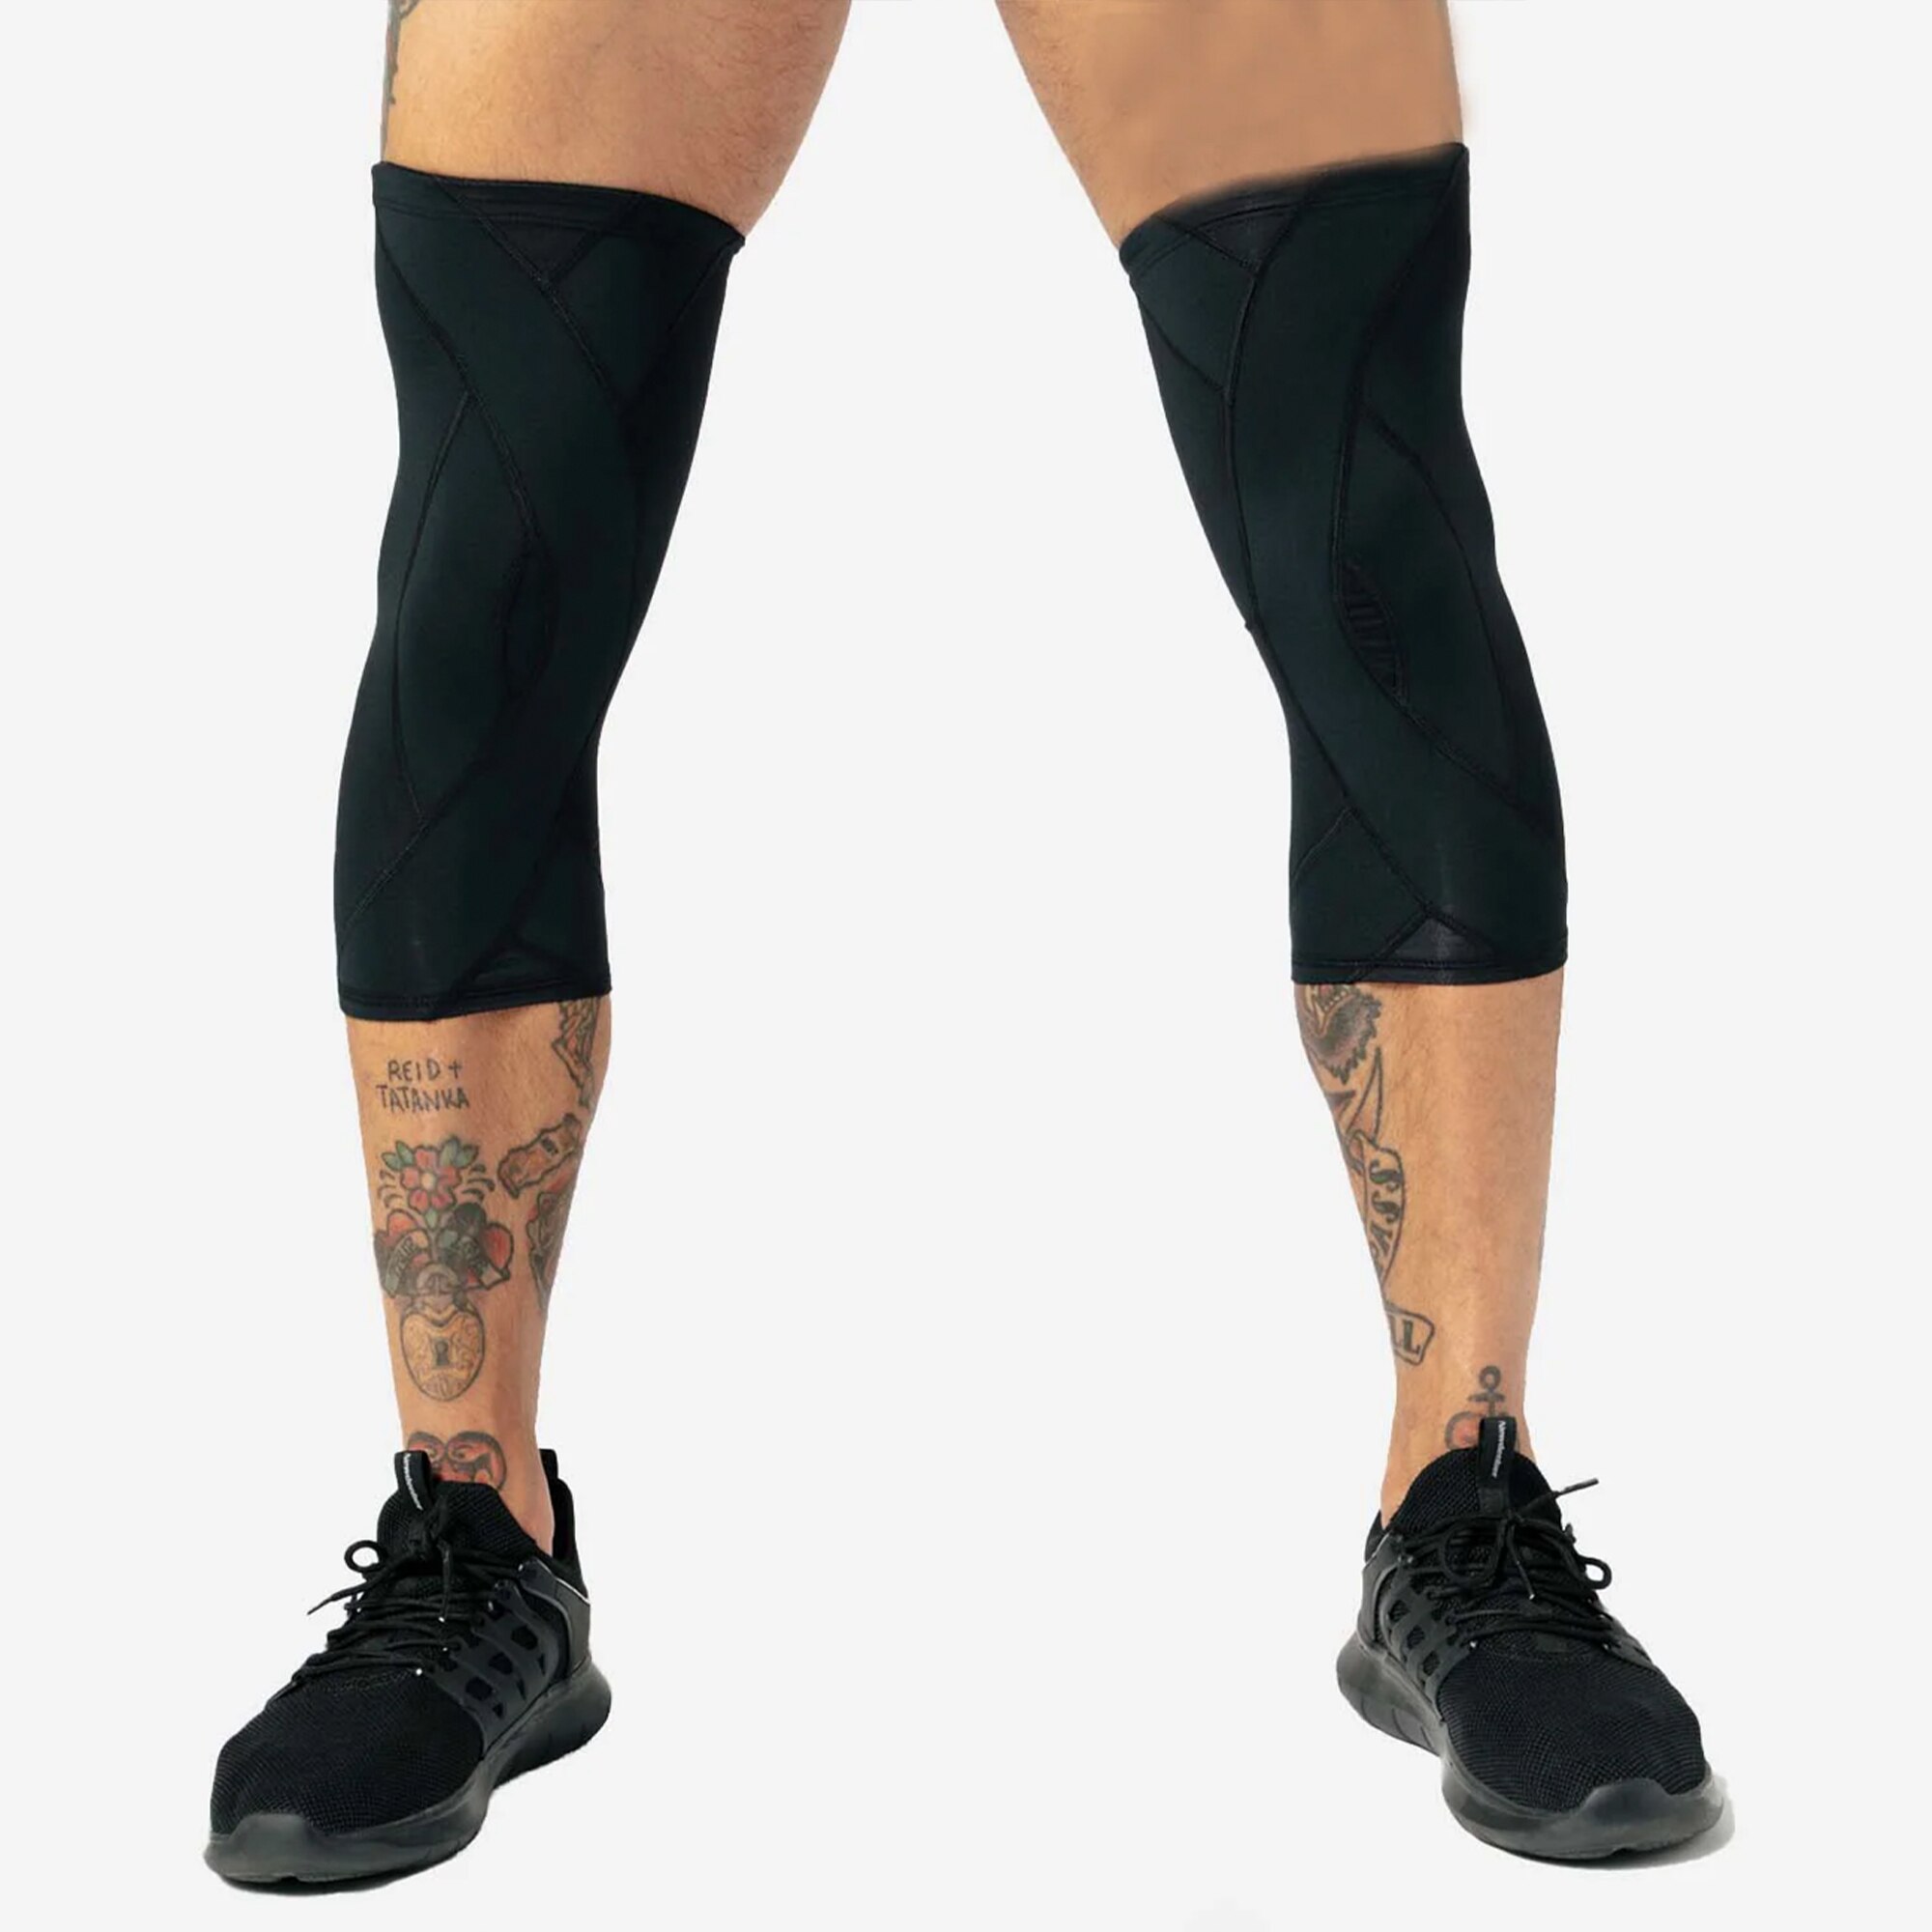 NEW: DNFD Active AX Compression Knee Sleeves - CVS PharmacyIngredients ...